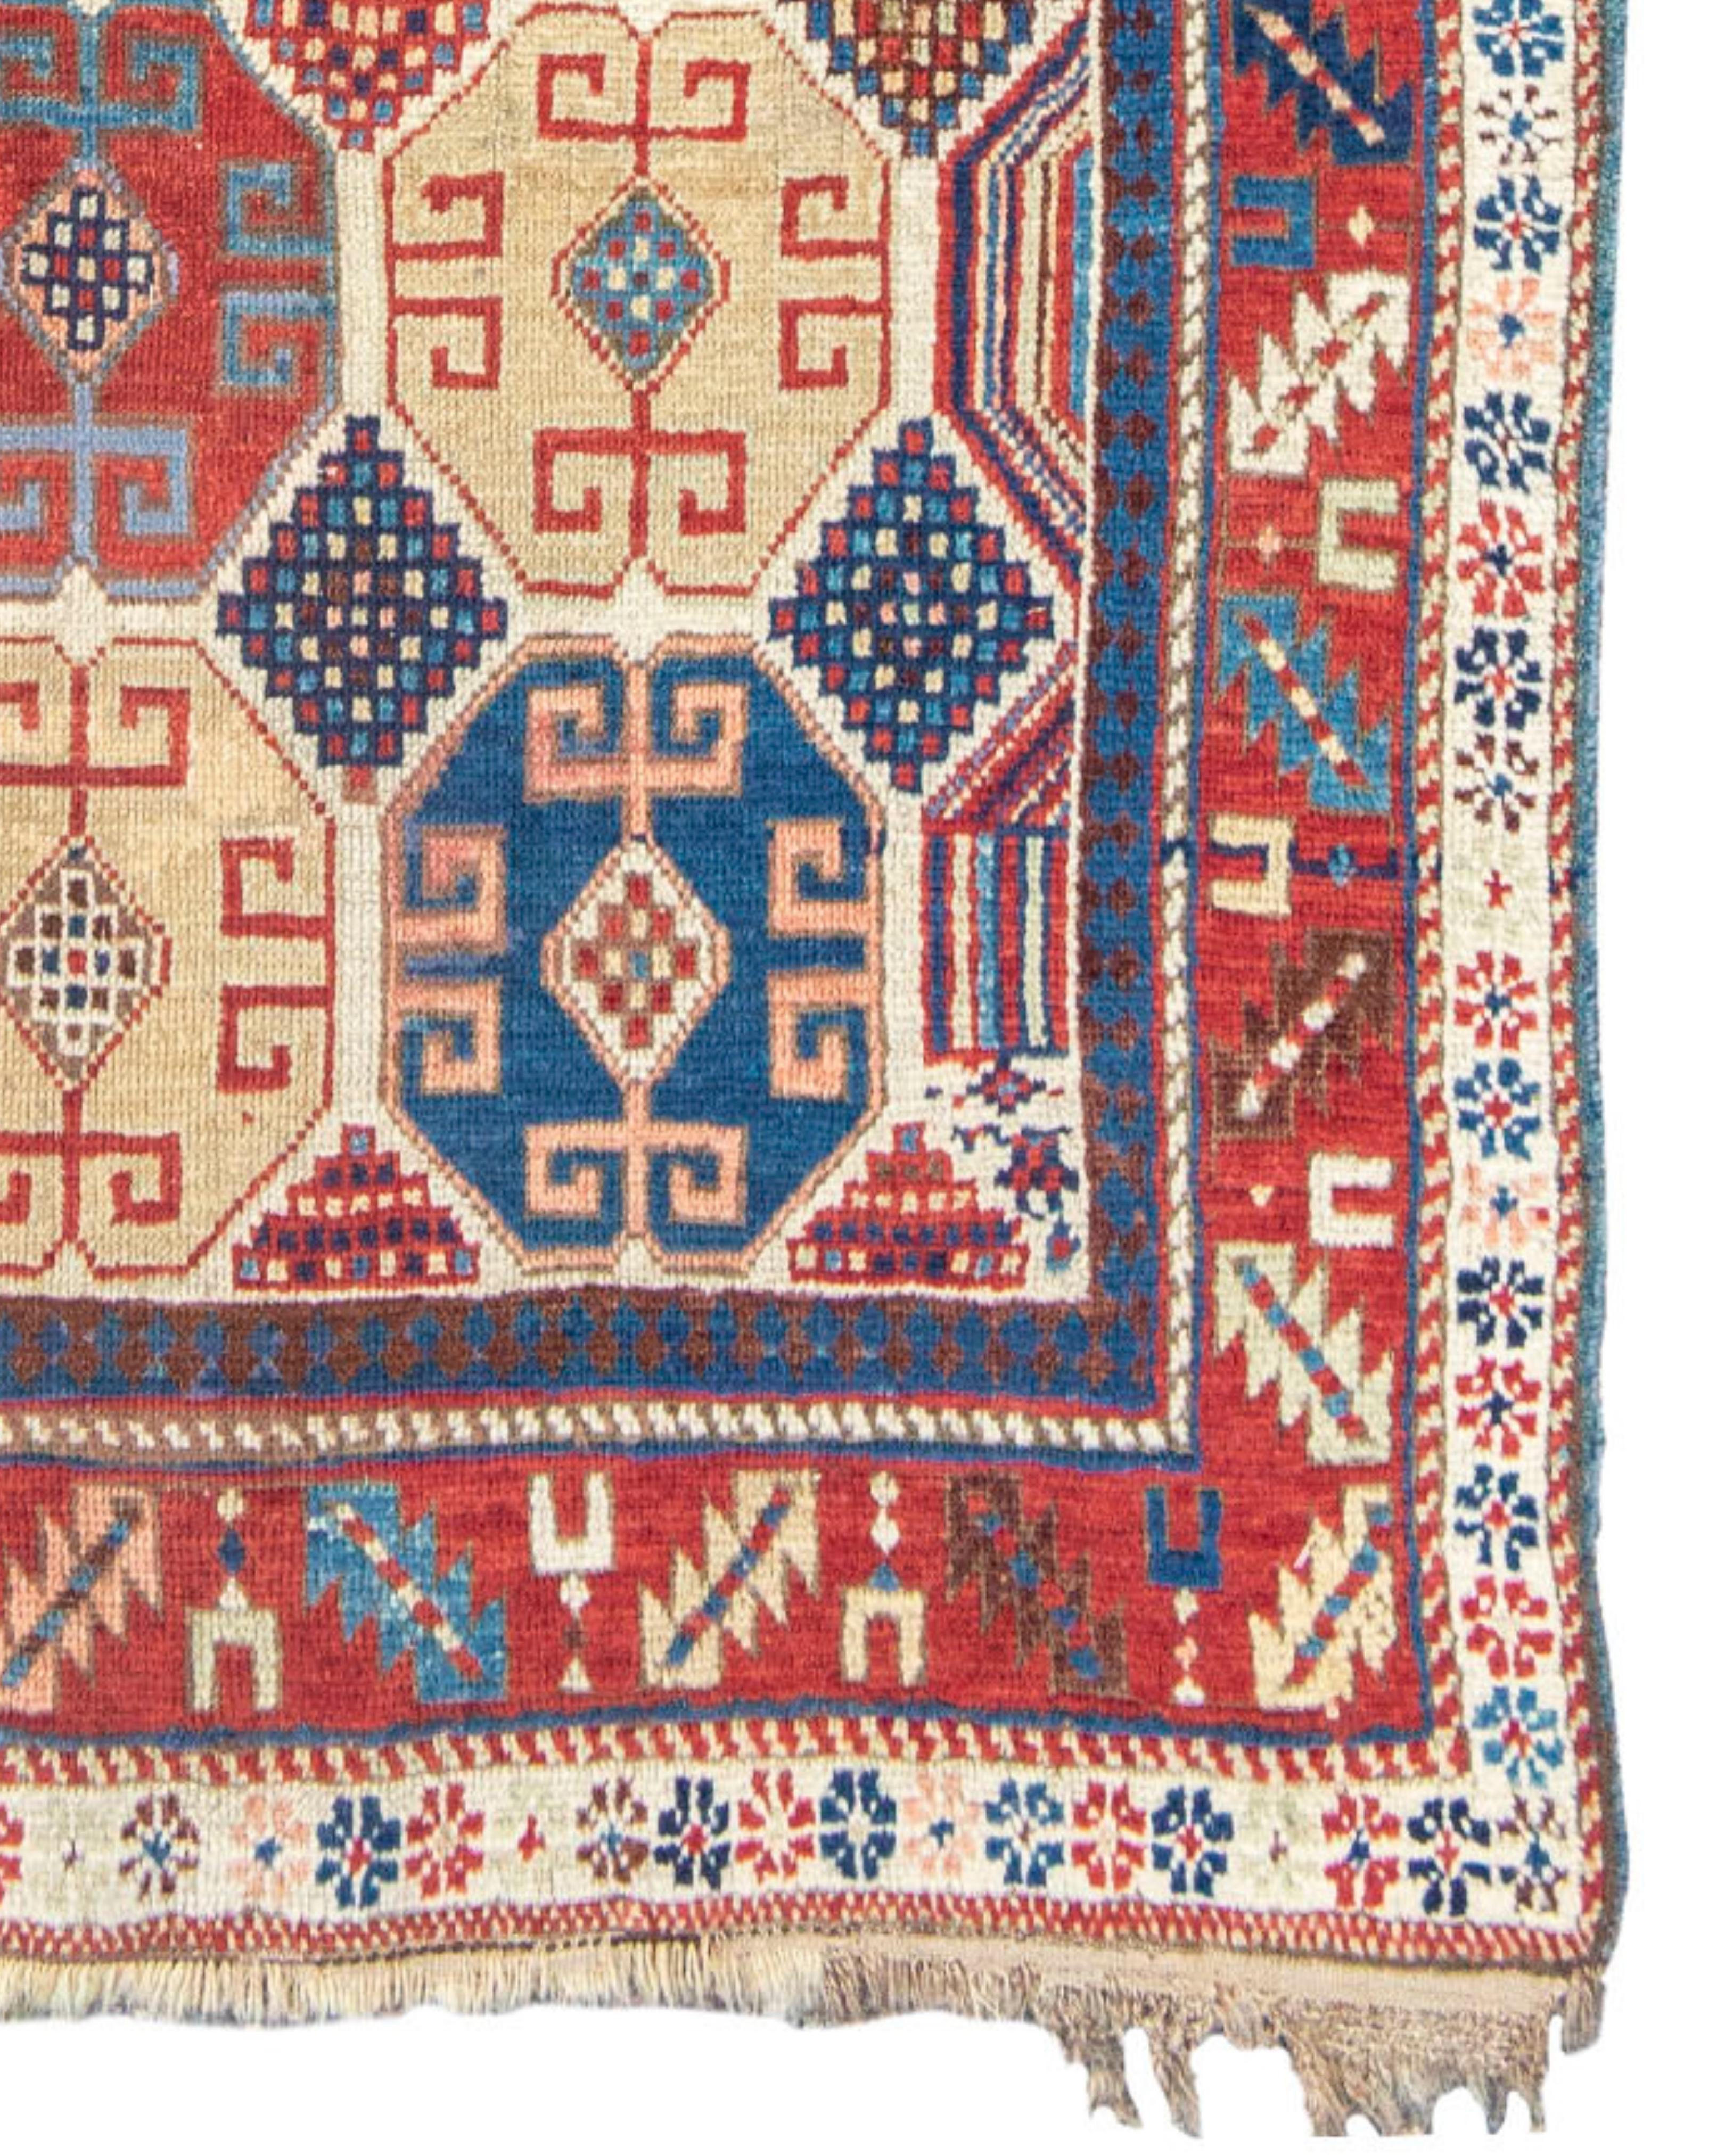 Exceptional Antique Caucasian Moghan Prayer Rug, 19th Century

This is an extremely interesting and atypical example from the Moghan district of the Trans Caucasus region. Instead of the more typical ‘memling göl’ pattern, this rug depicts a